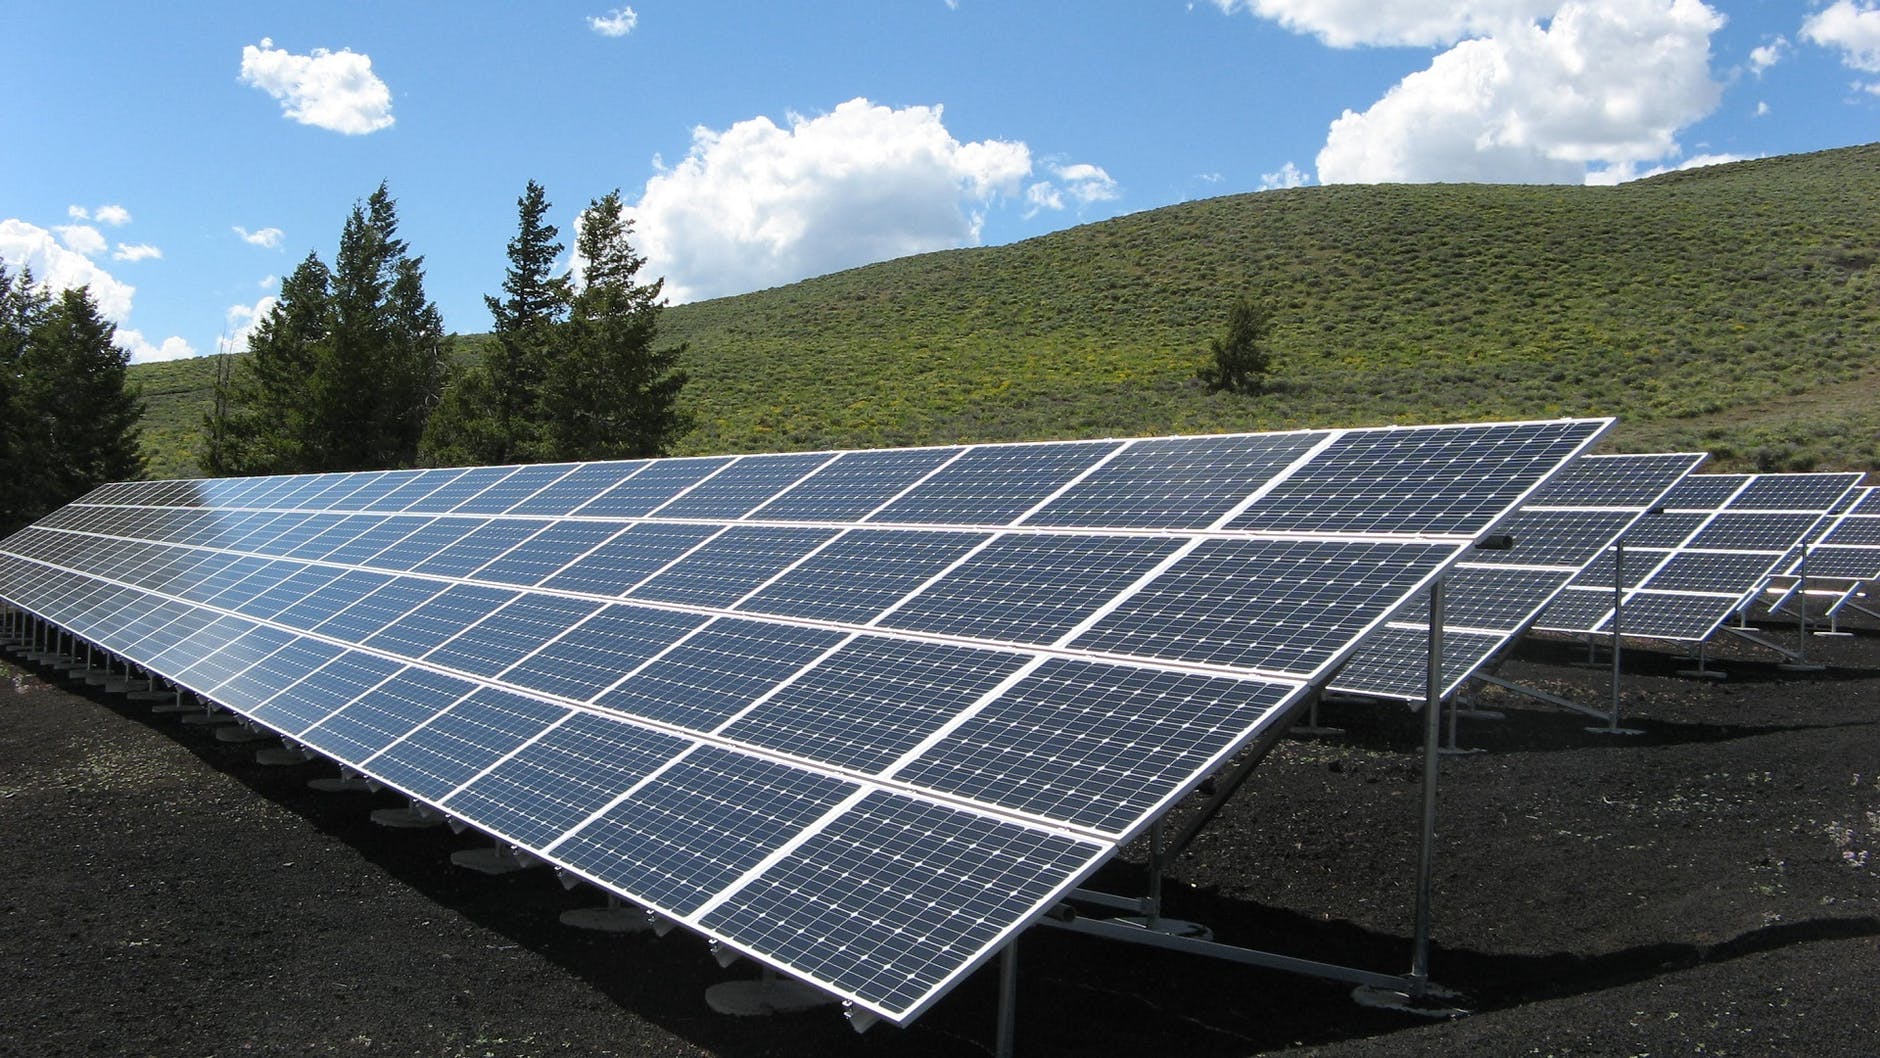 Advantages of Using Solar Power